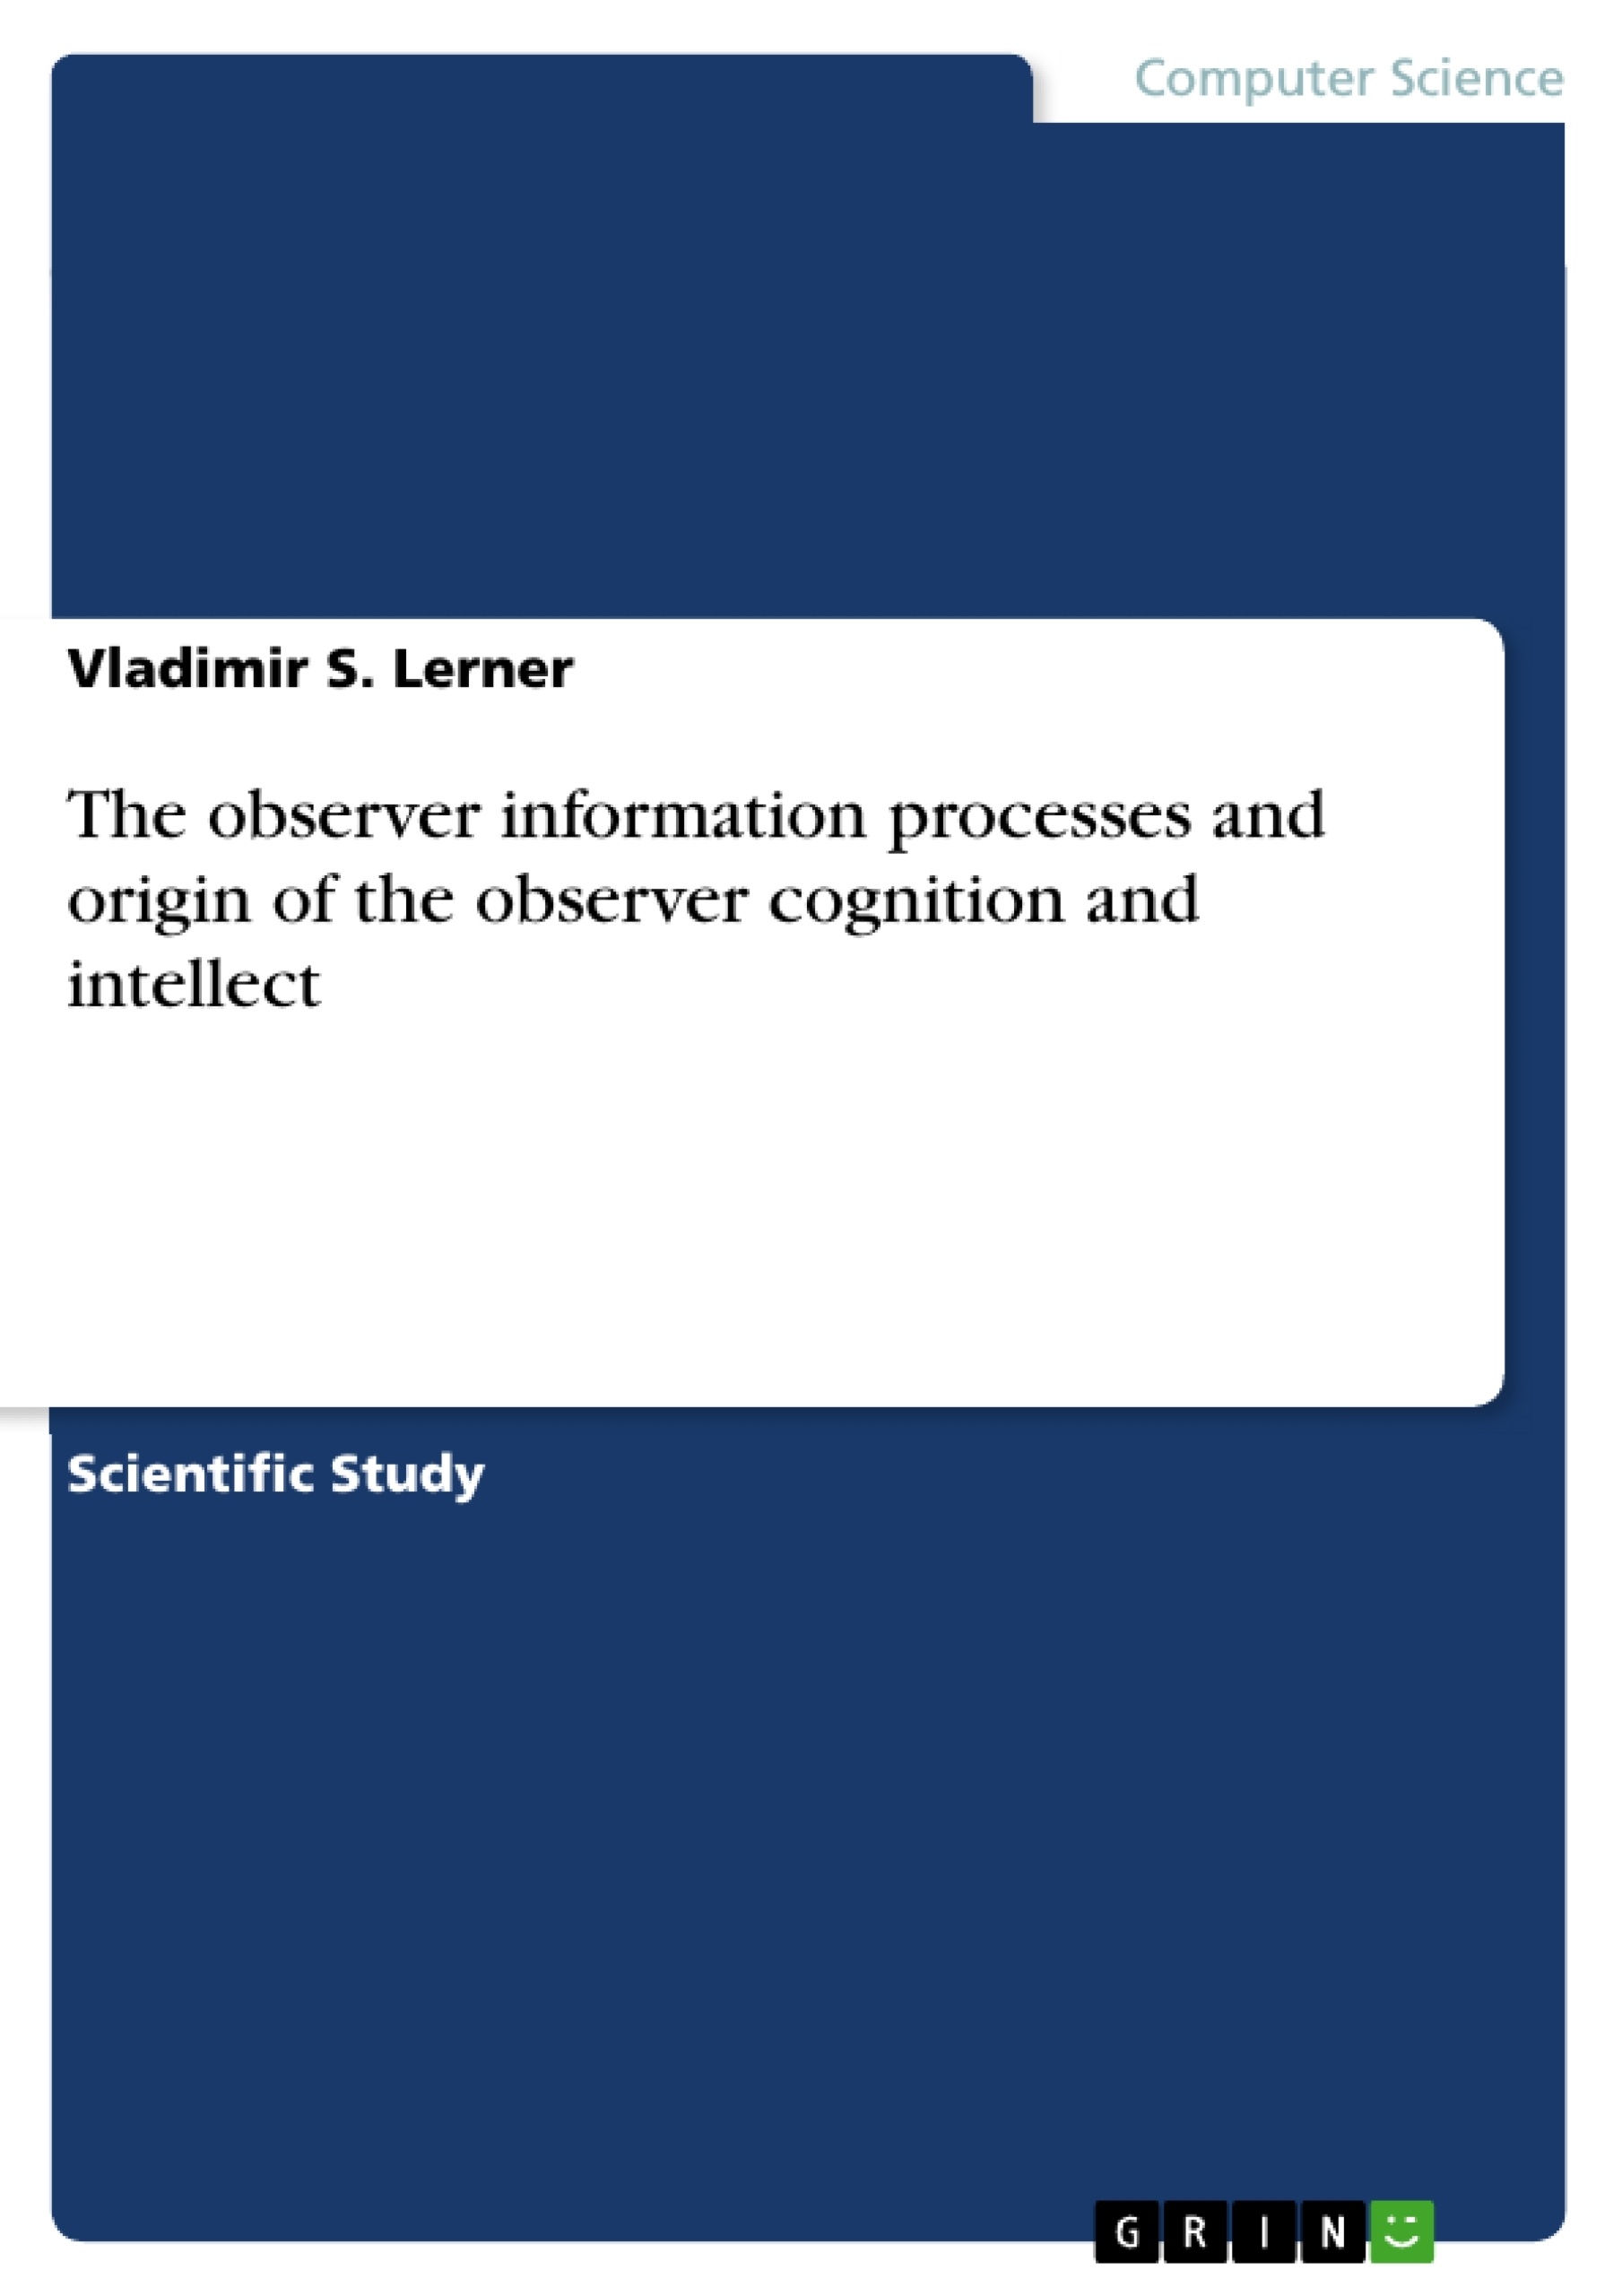 Titre: The observer information processes and origin of the observer cognition and intellect